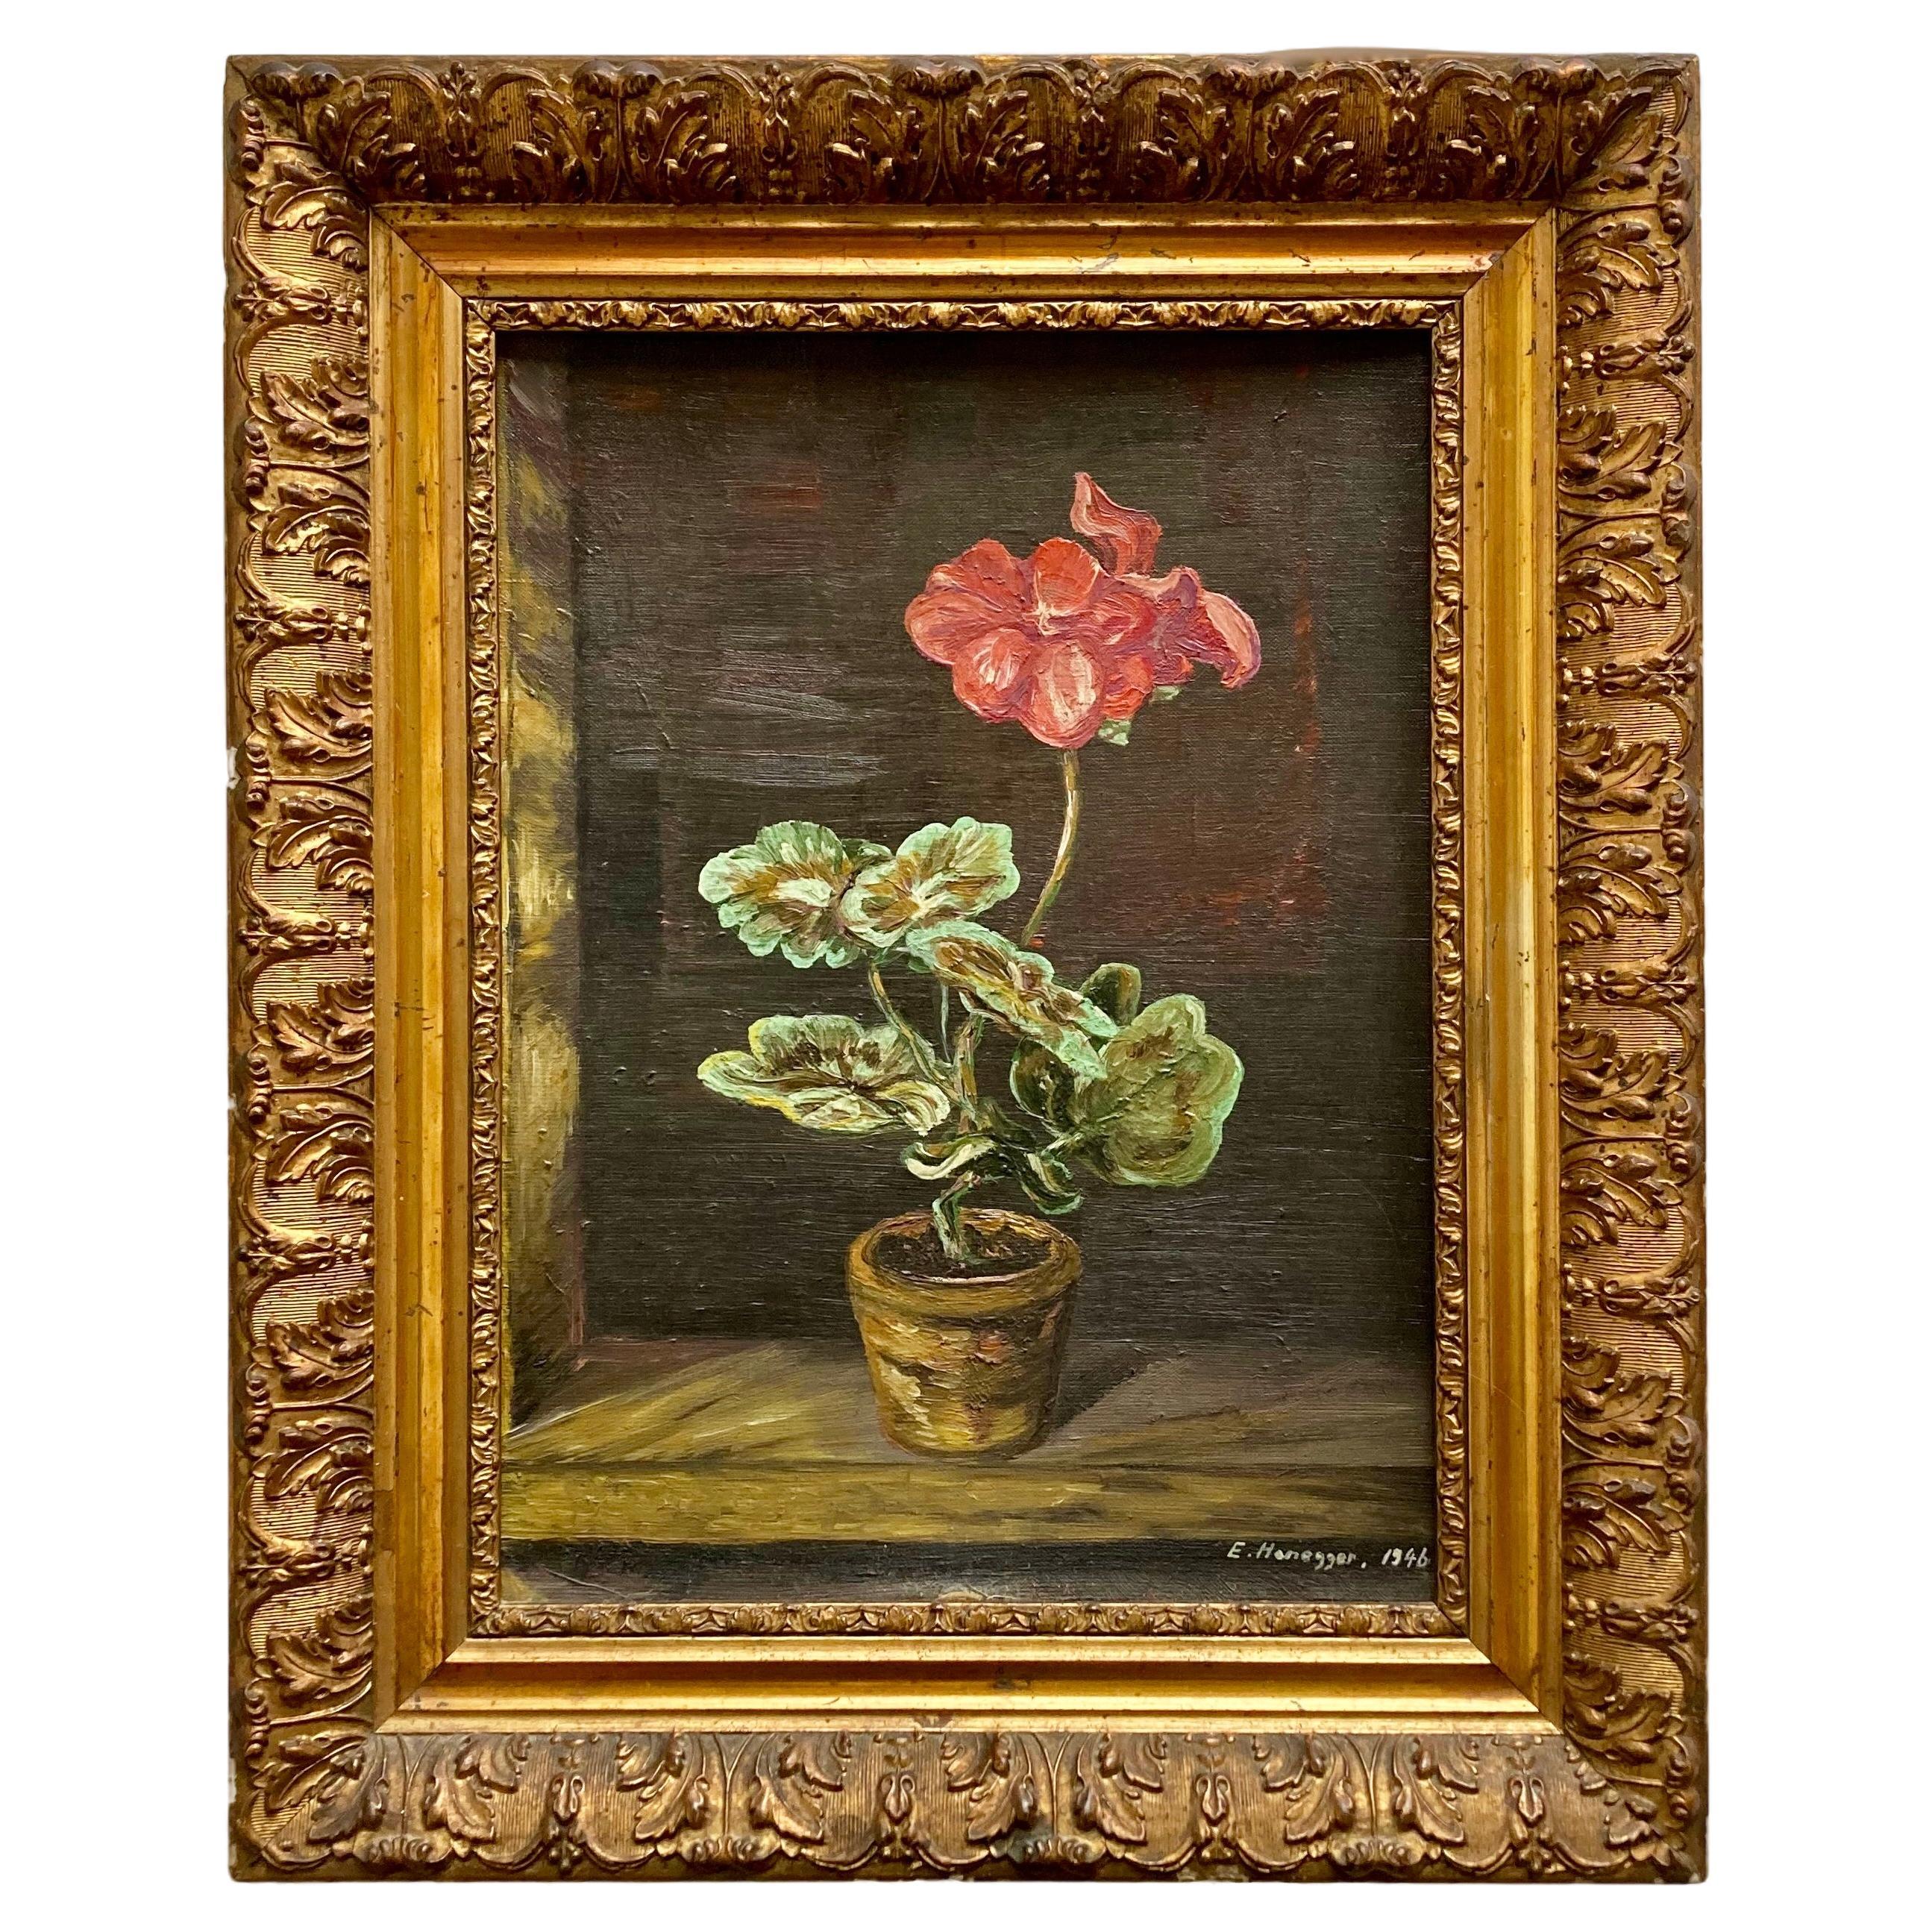 1940's Vintage Original French Floral Oil Painting Framed and Signed by Artist